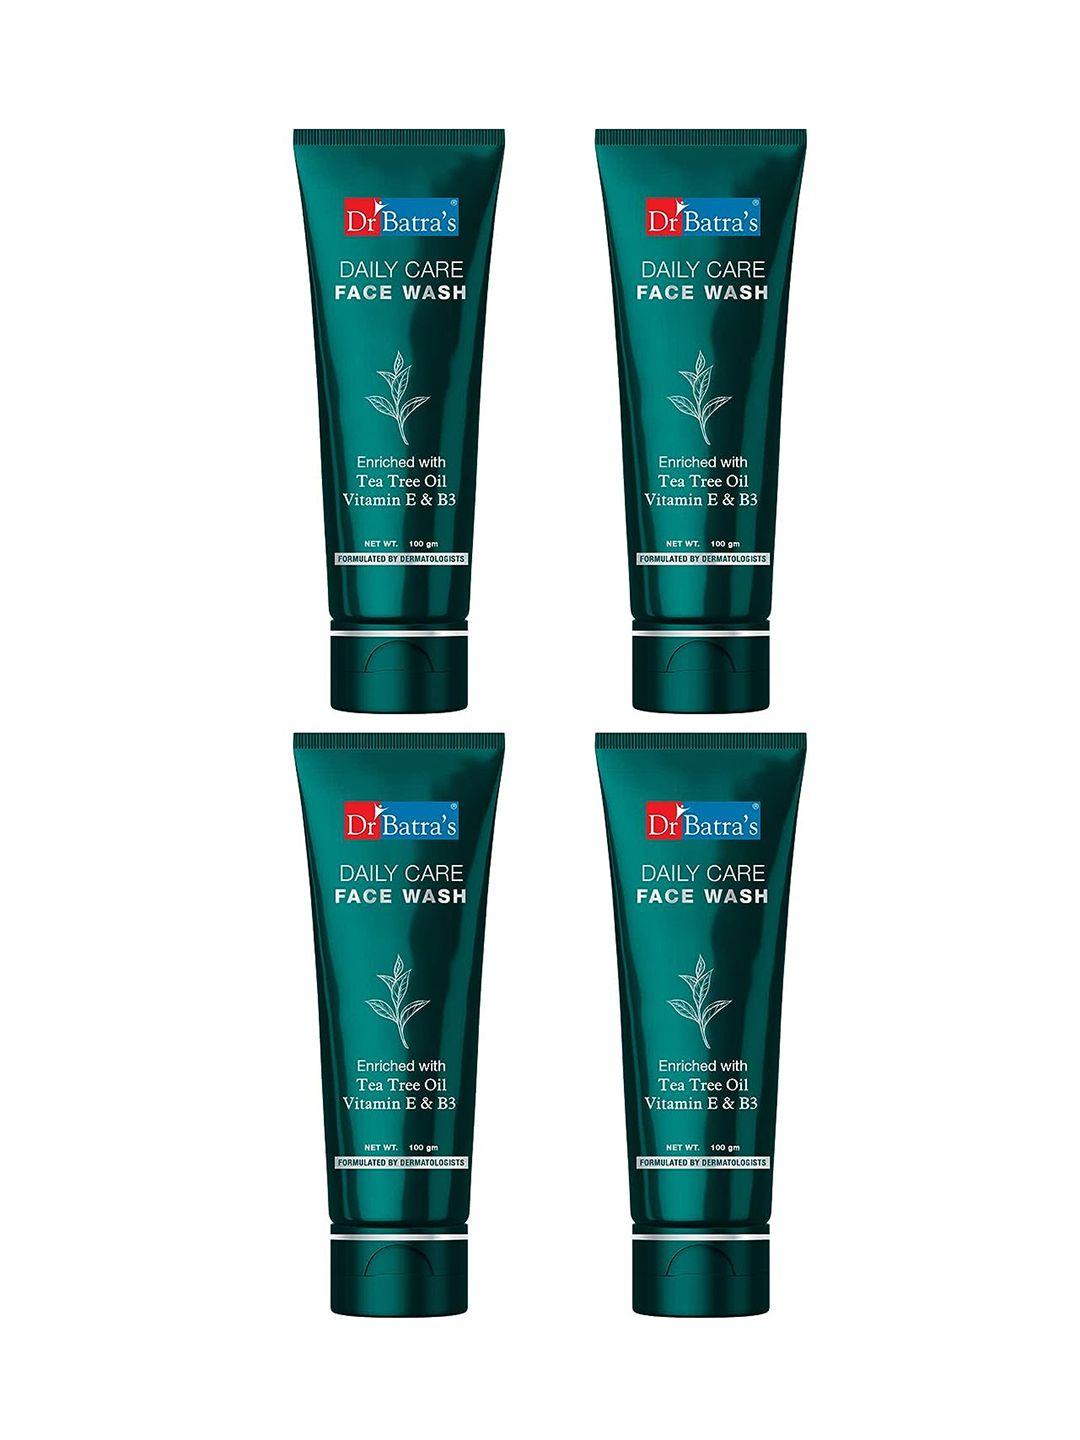 dr.-batras-set-of-4-daily-care-face-wash-with-tea-tree-oil-&-vitamin-b3---100g-each